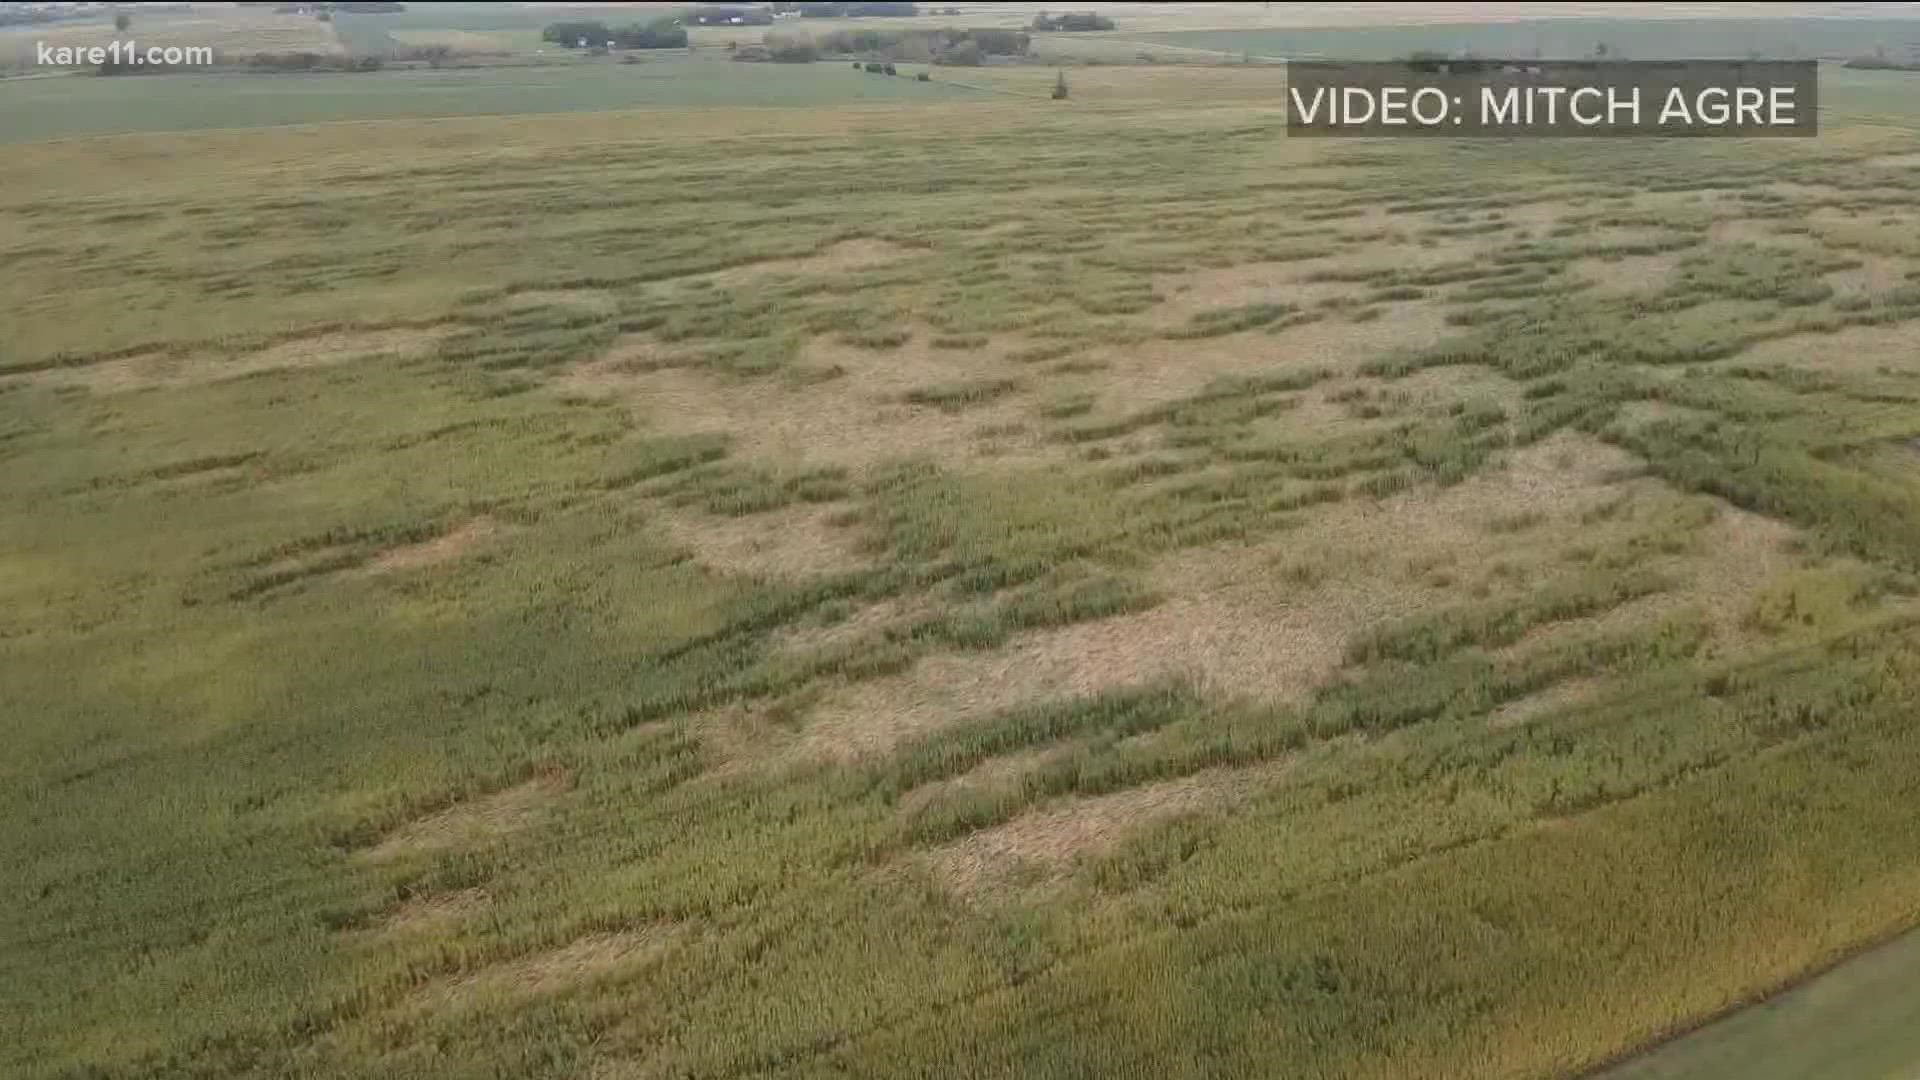 With the harvest just a few weeks ago, some of the state's corn is suffering after recent storms.